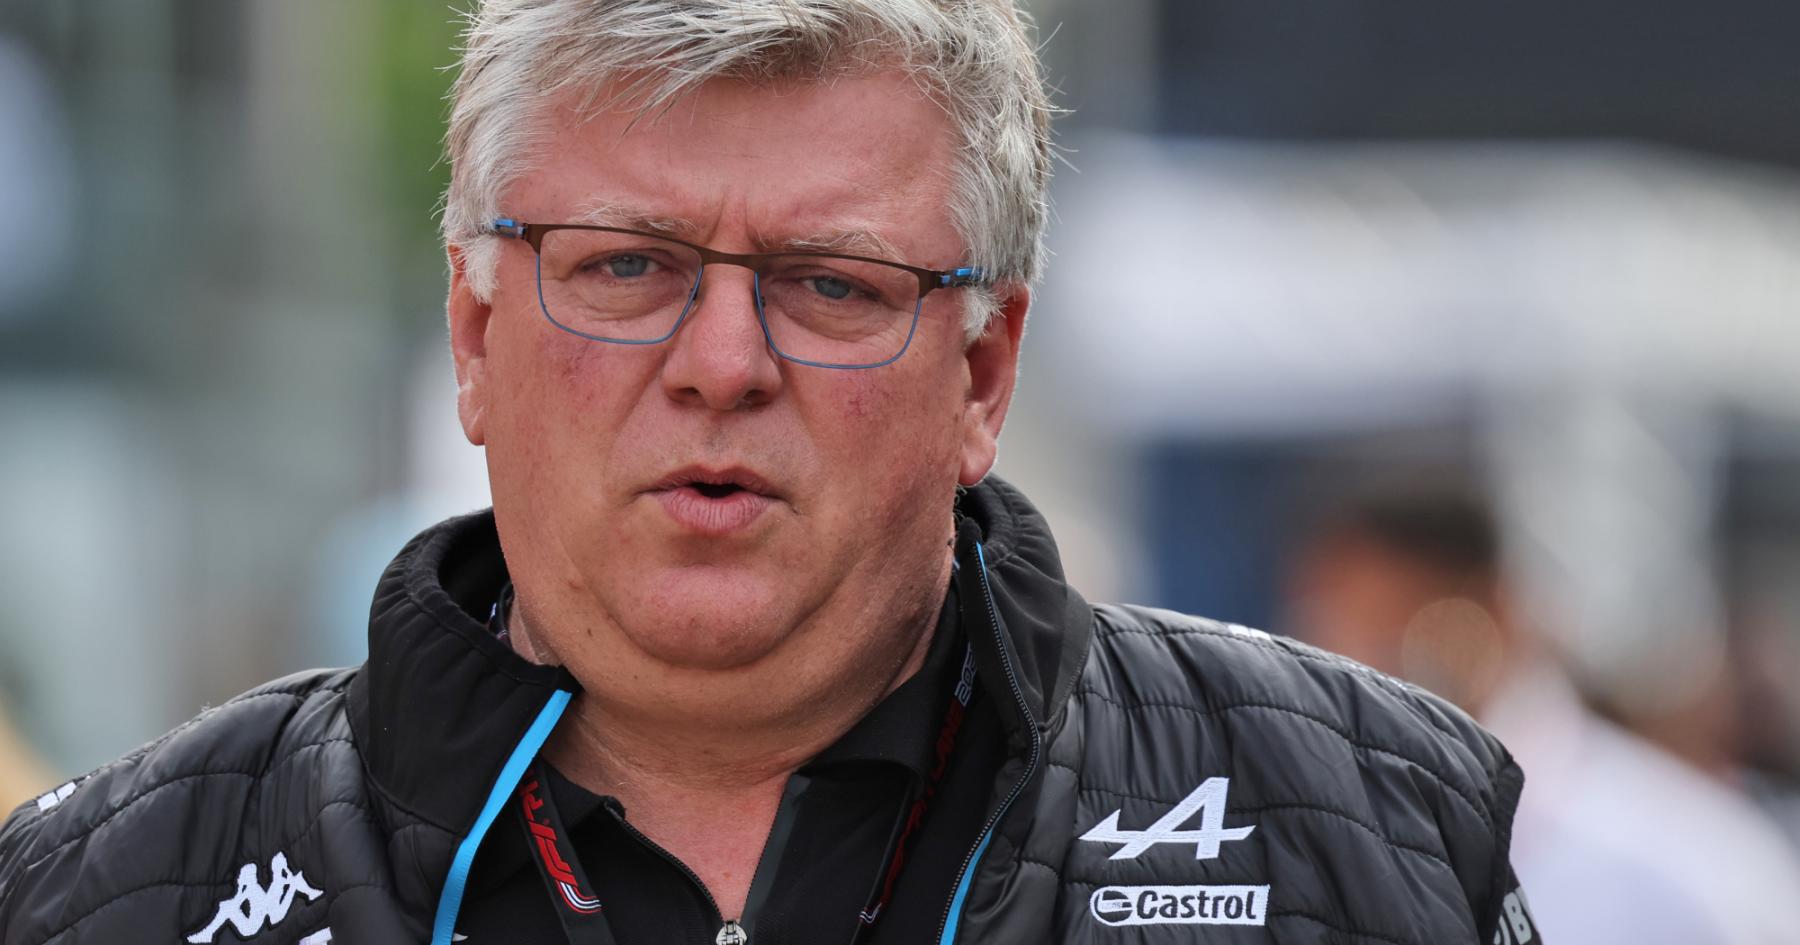 Respected Racing Executive Lawrence Szafnauer Sets Sights on Majestic Move to Andretti Formula 1 Team